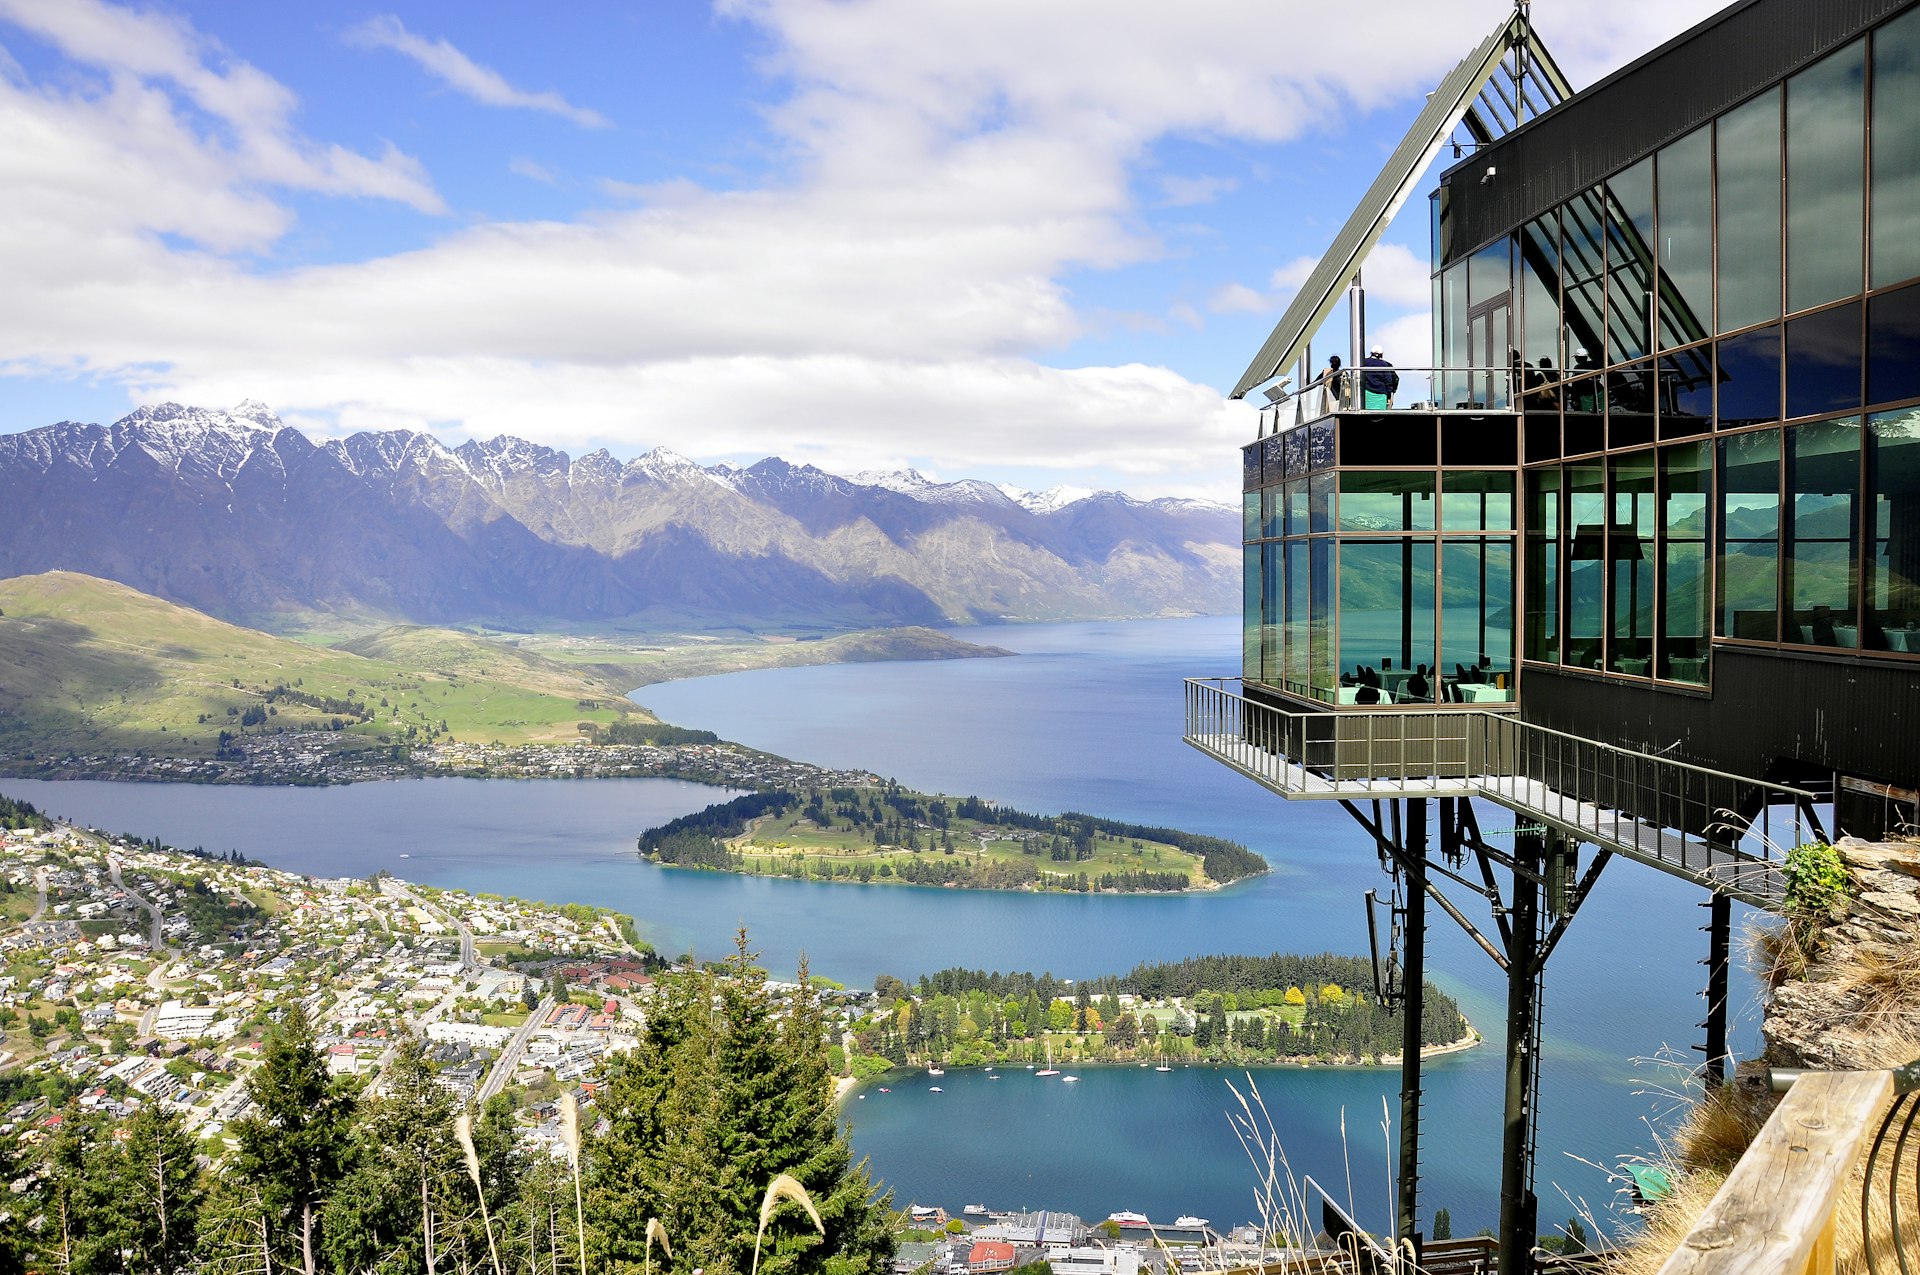 A large glass building sits on a high hill overlooking the Queenstown skyline of snow-capped mountains and a large lake with a large chunk of greenery jutting into the water.  